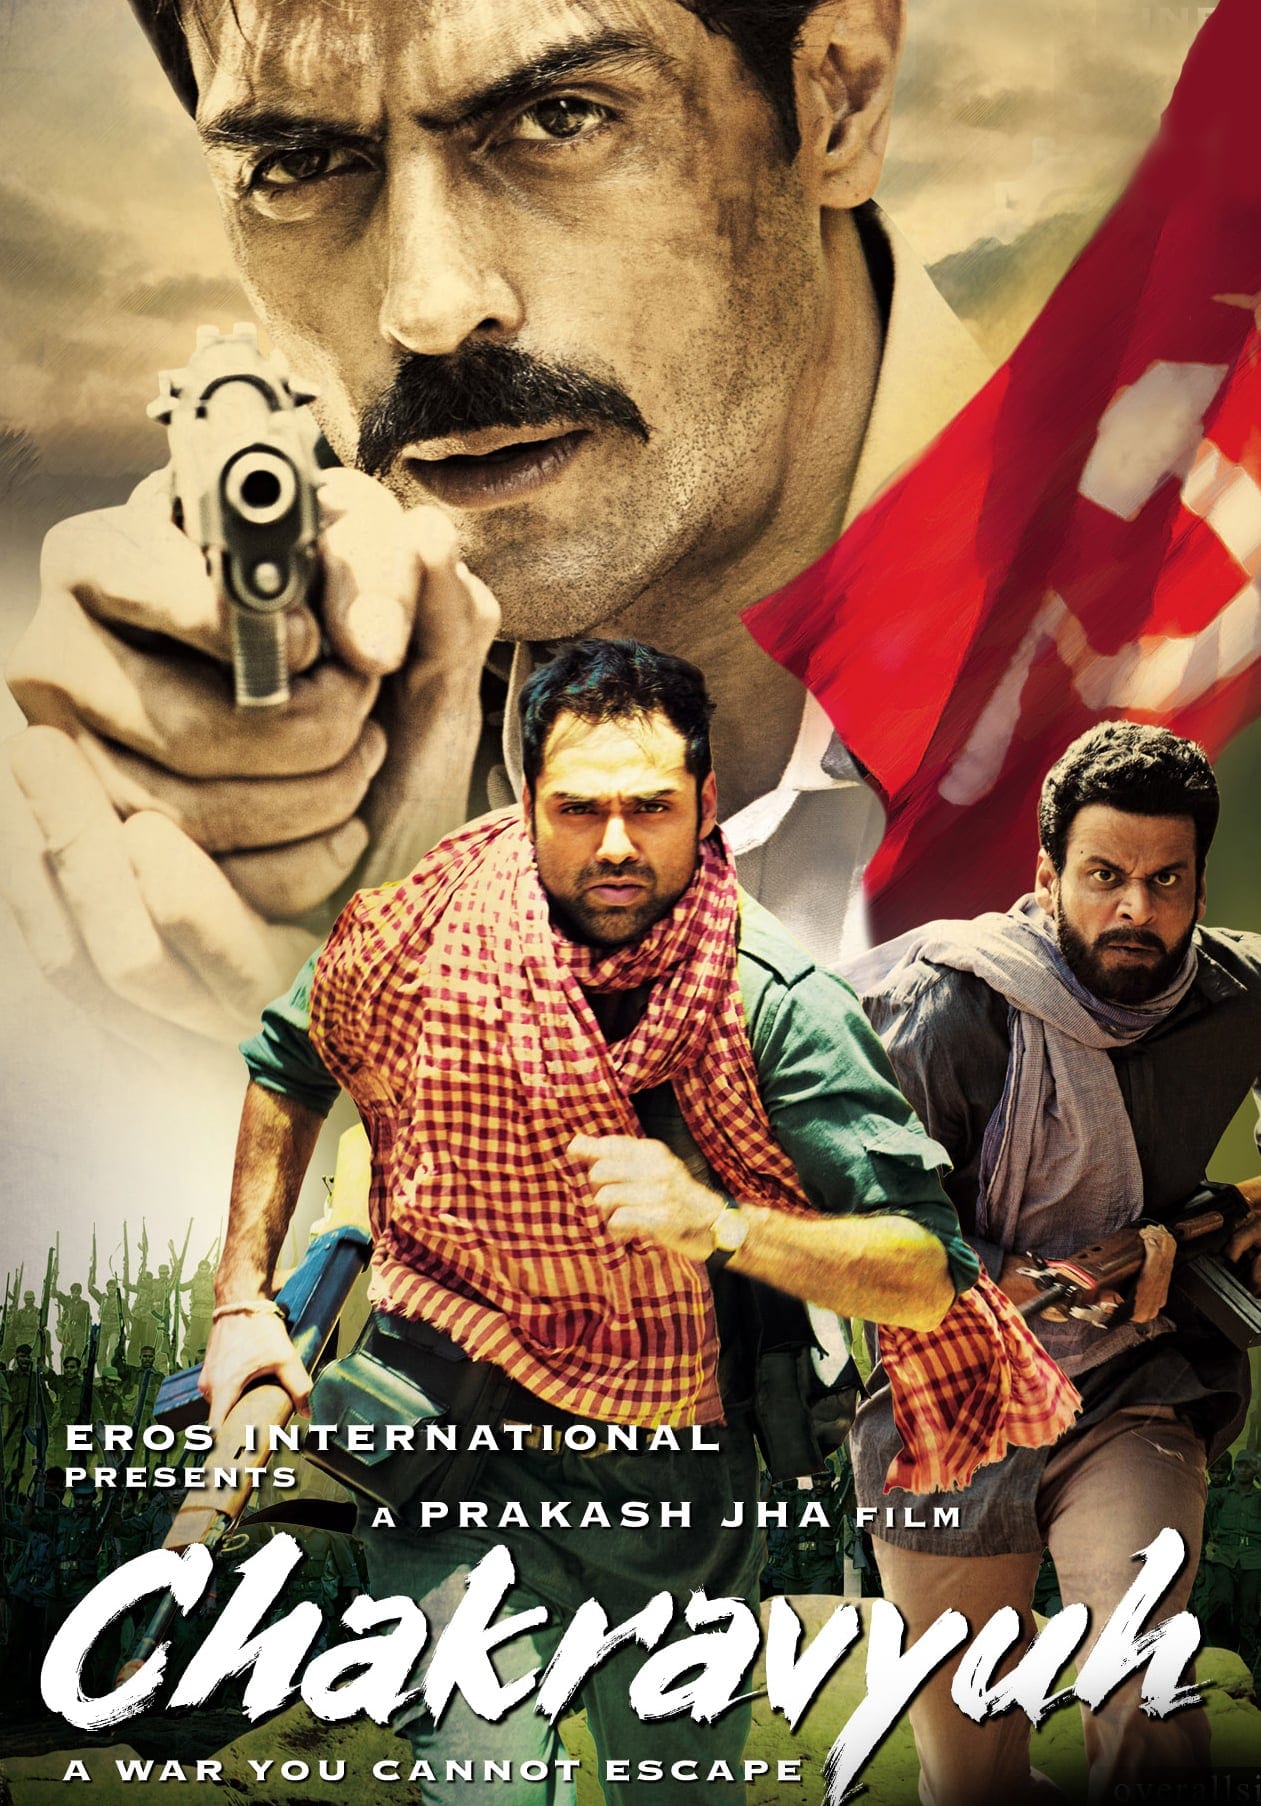 Poster for the movie "Chakravyuh"